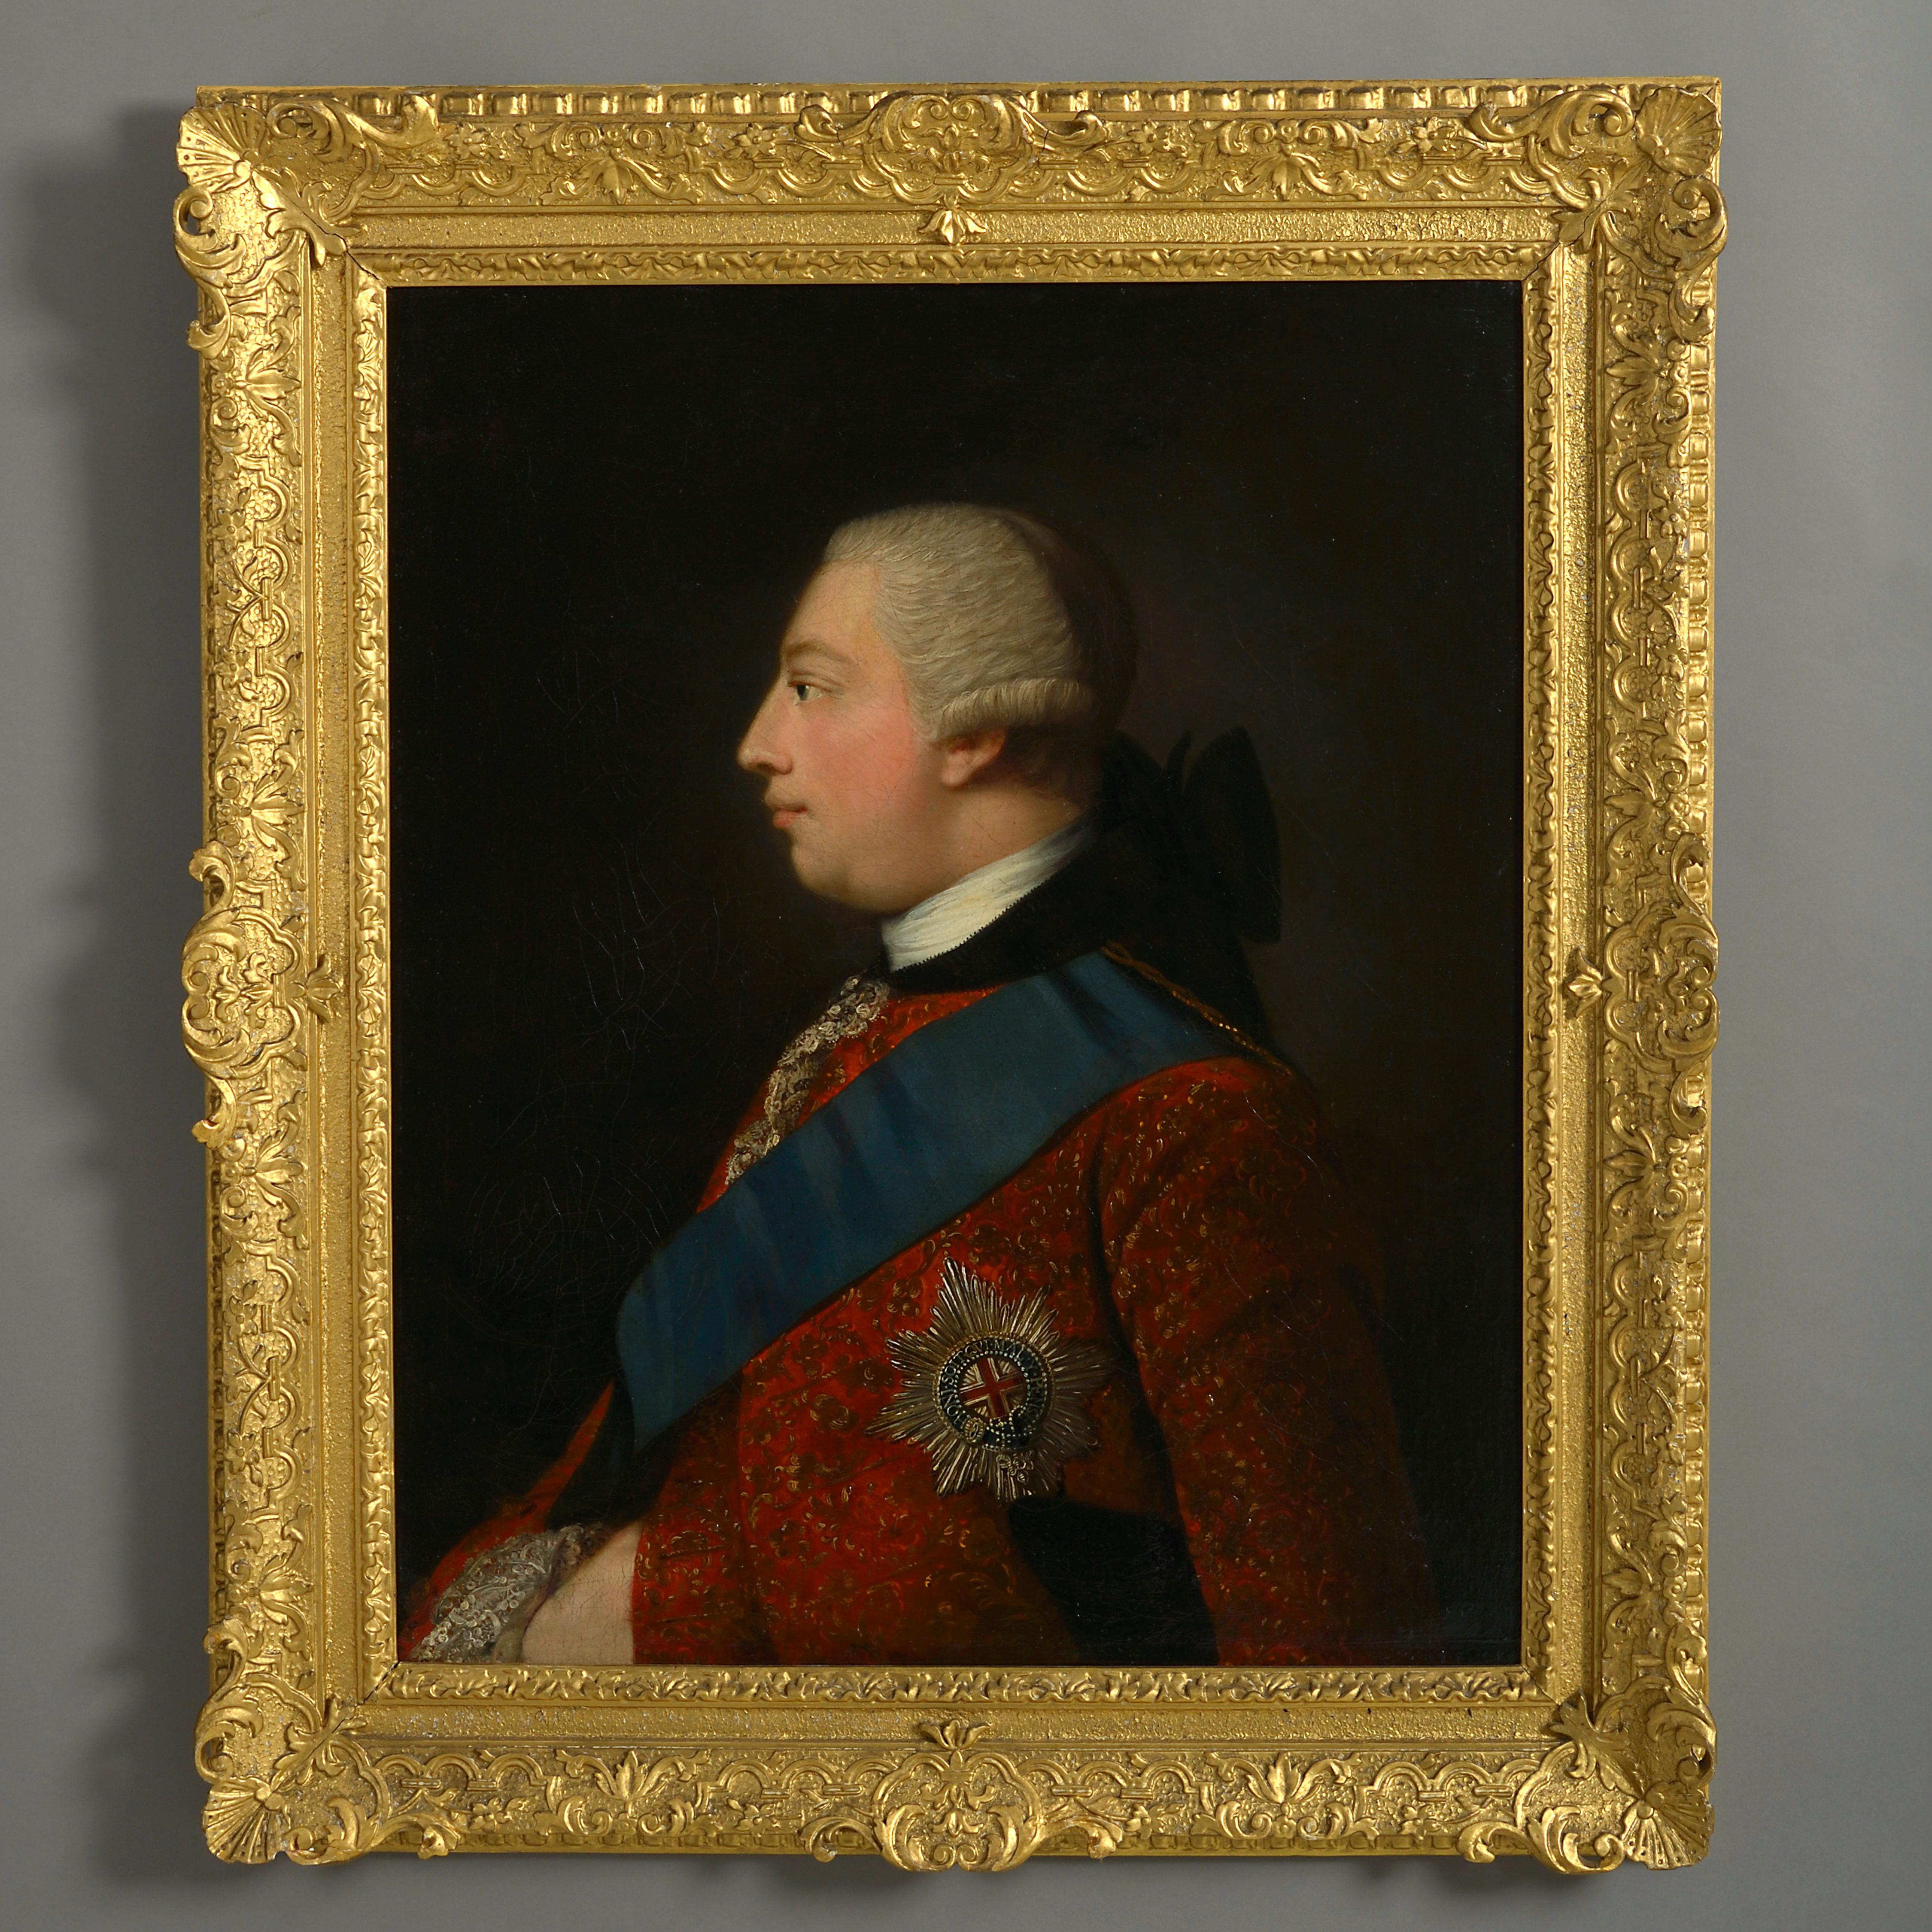 Unknown Portrait Painting - Studio of Allan Ramsay, A Portrait of King George III (1738-1820)